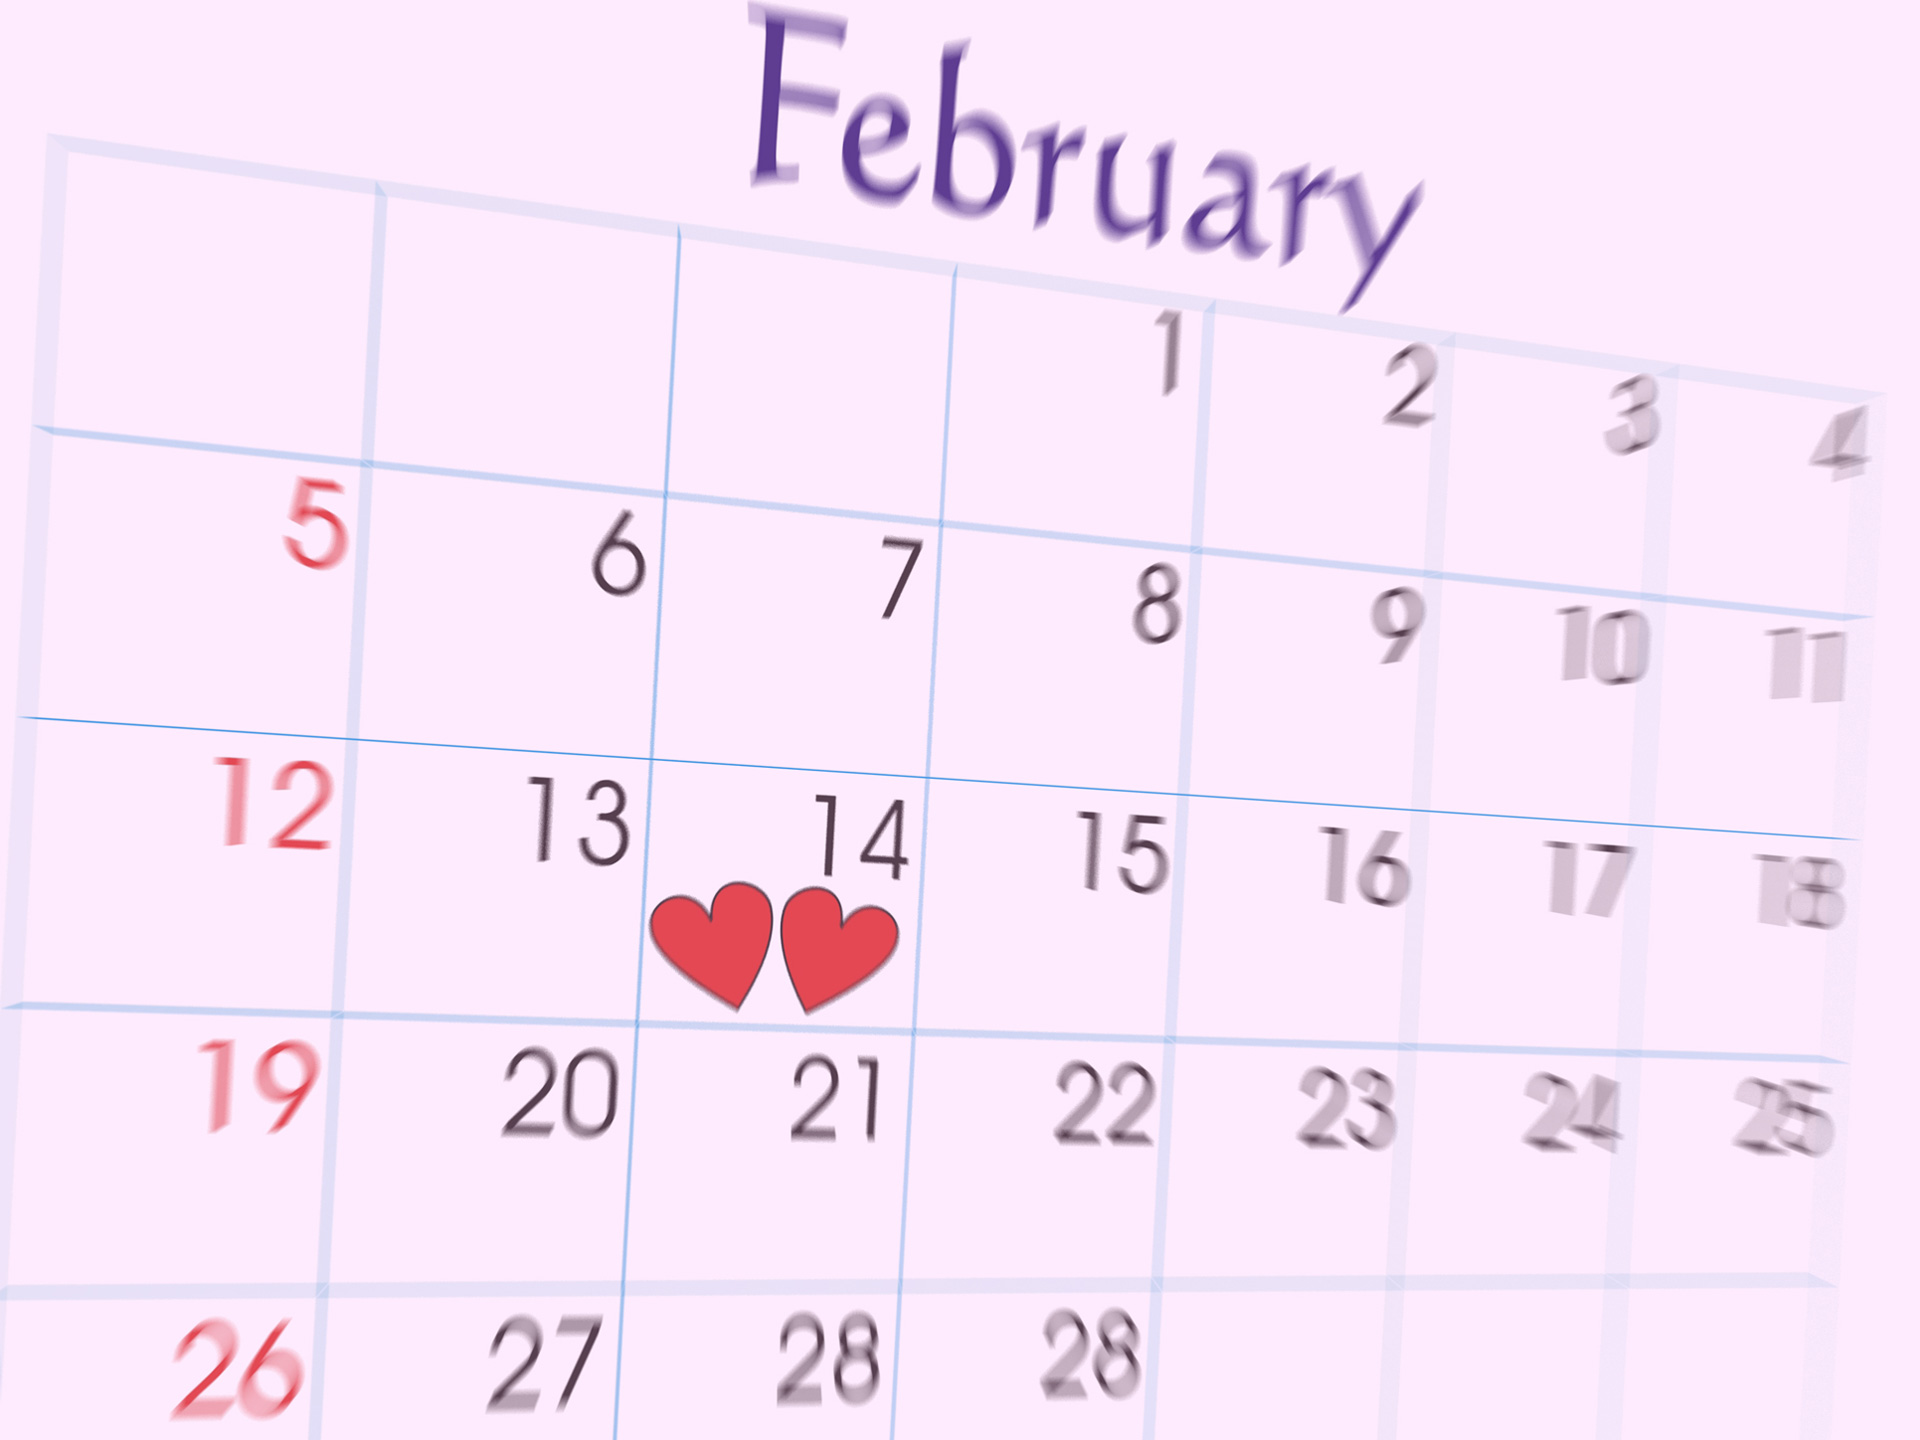 February Special Day 14th7181310017 - February Special Day 14th - Special, Millions, February, 14th